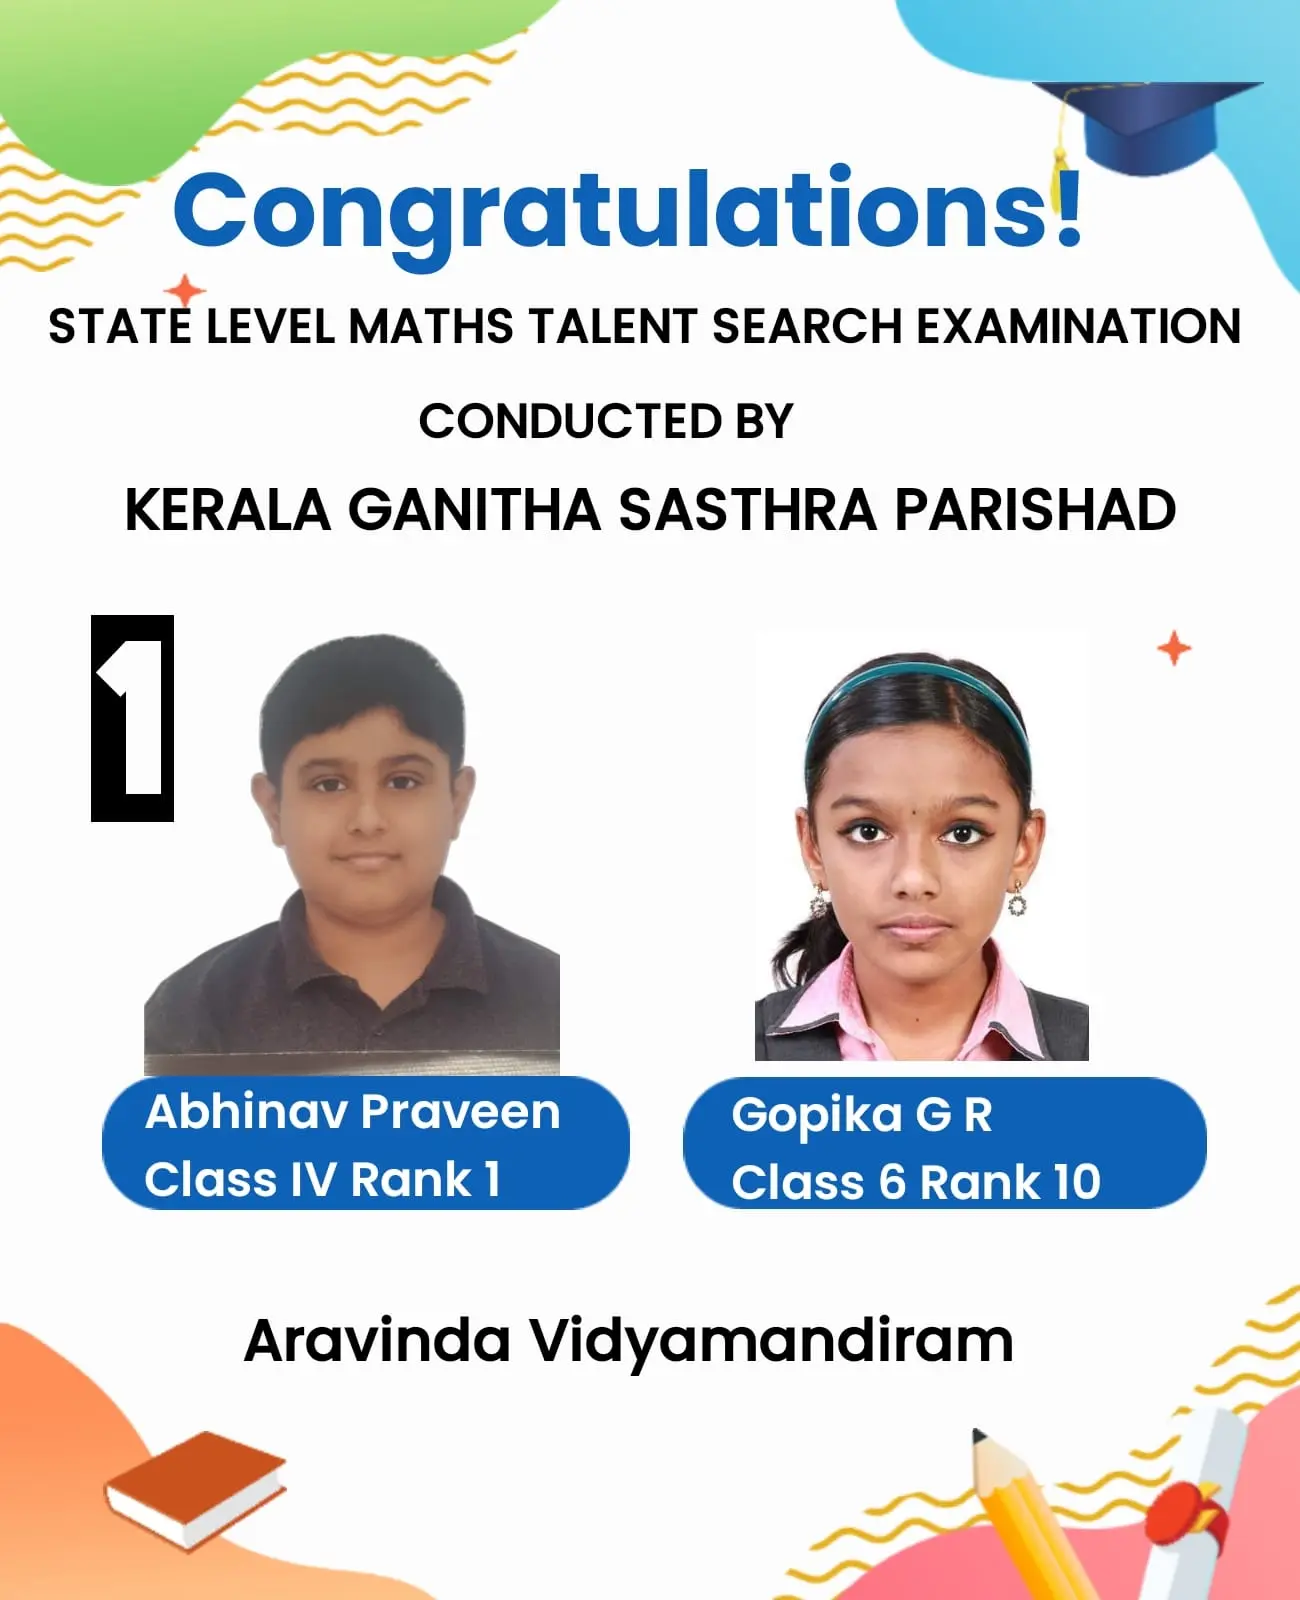 Hearty Congratulations to Our Students Who achieve 1st & 6th Rank of  Kerala Ganitha Sasthra Parishad.